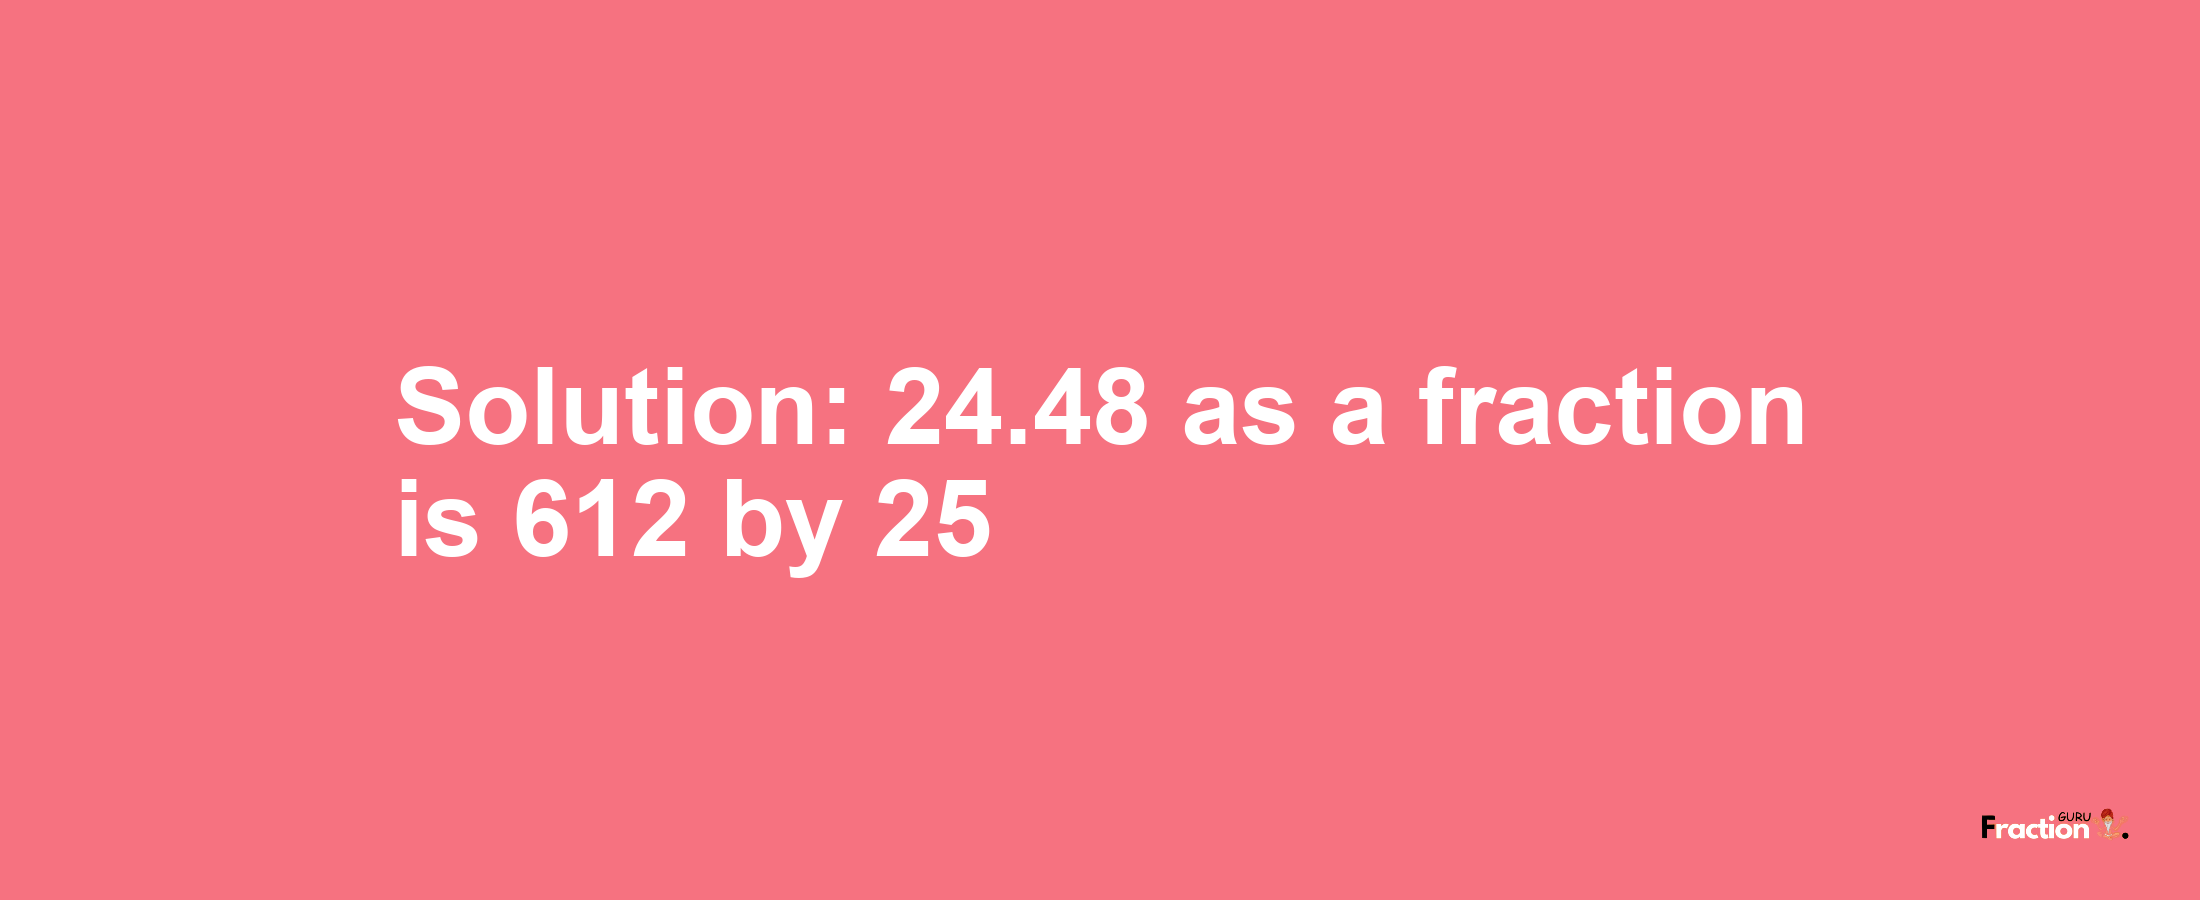 Solution:24.48 as a fraction is 612/25